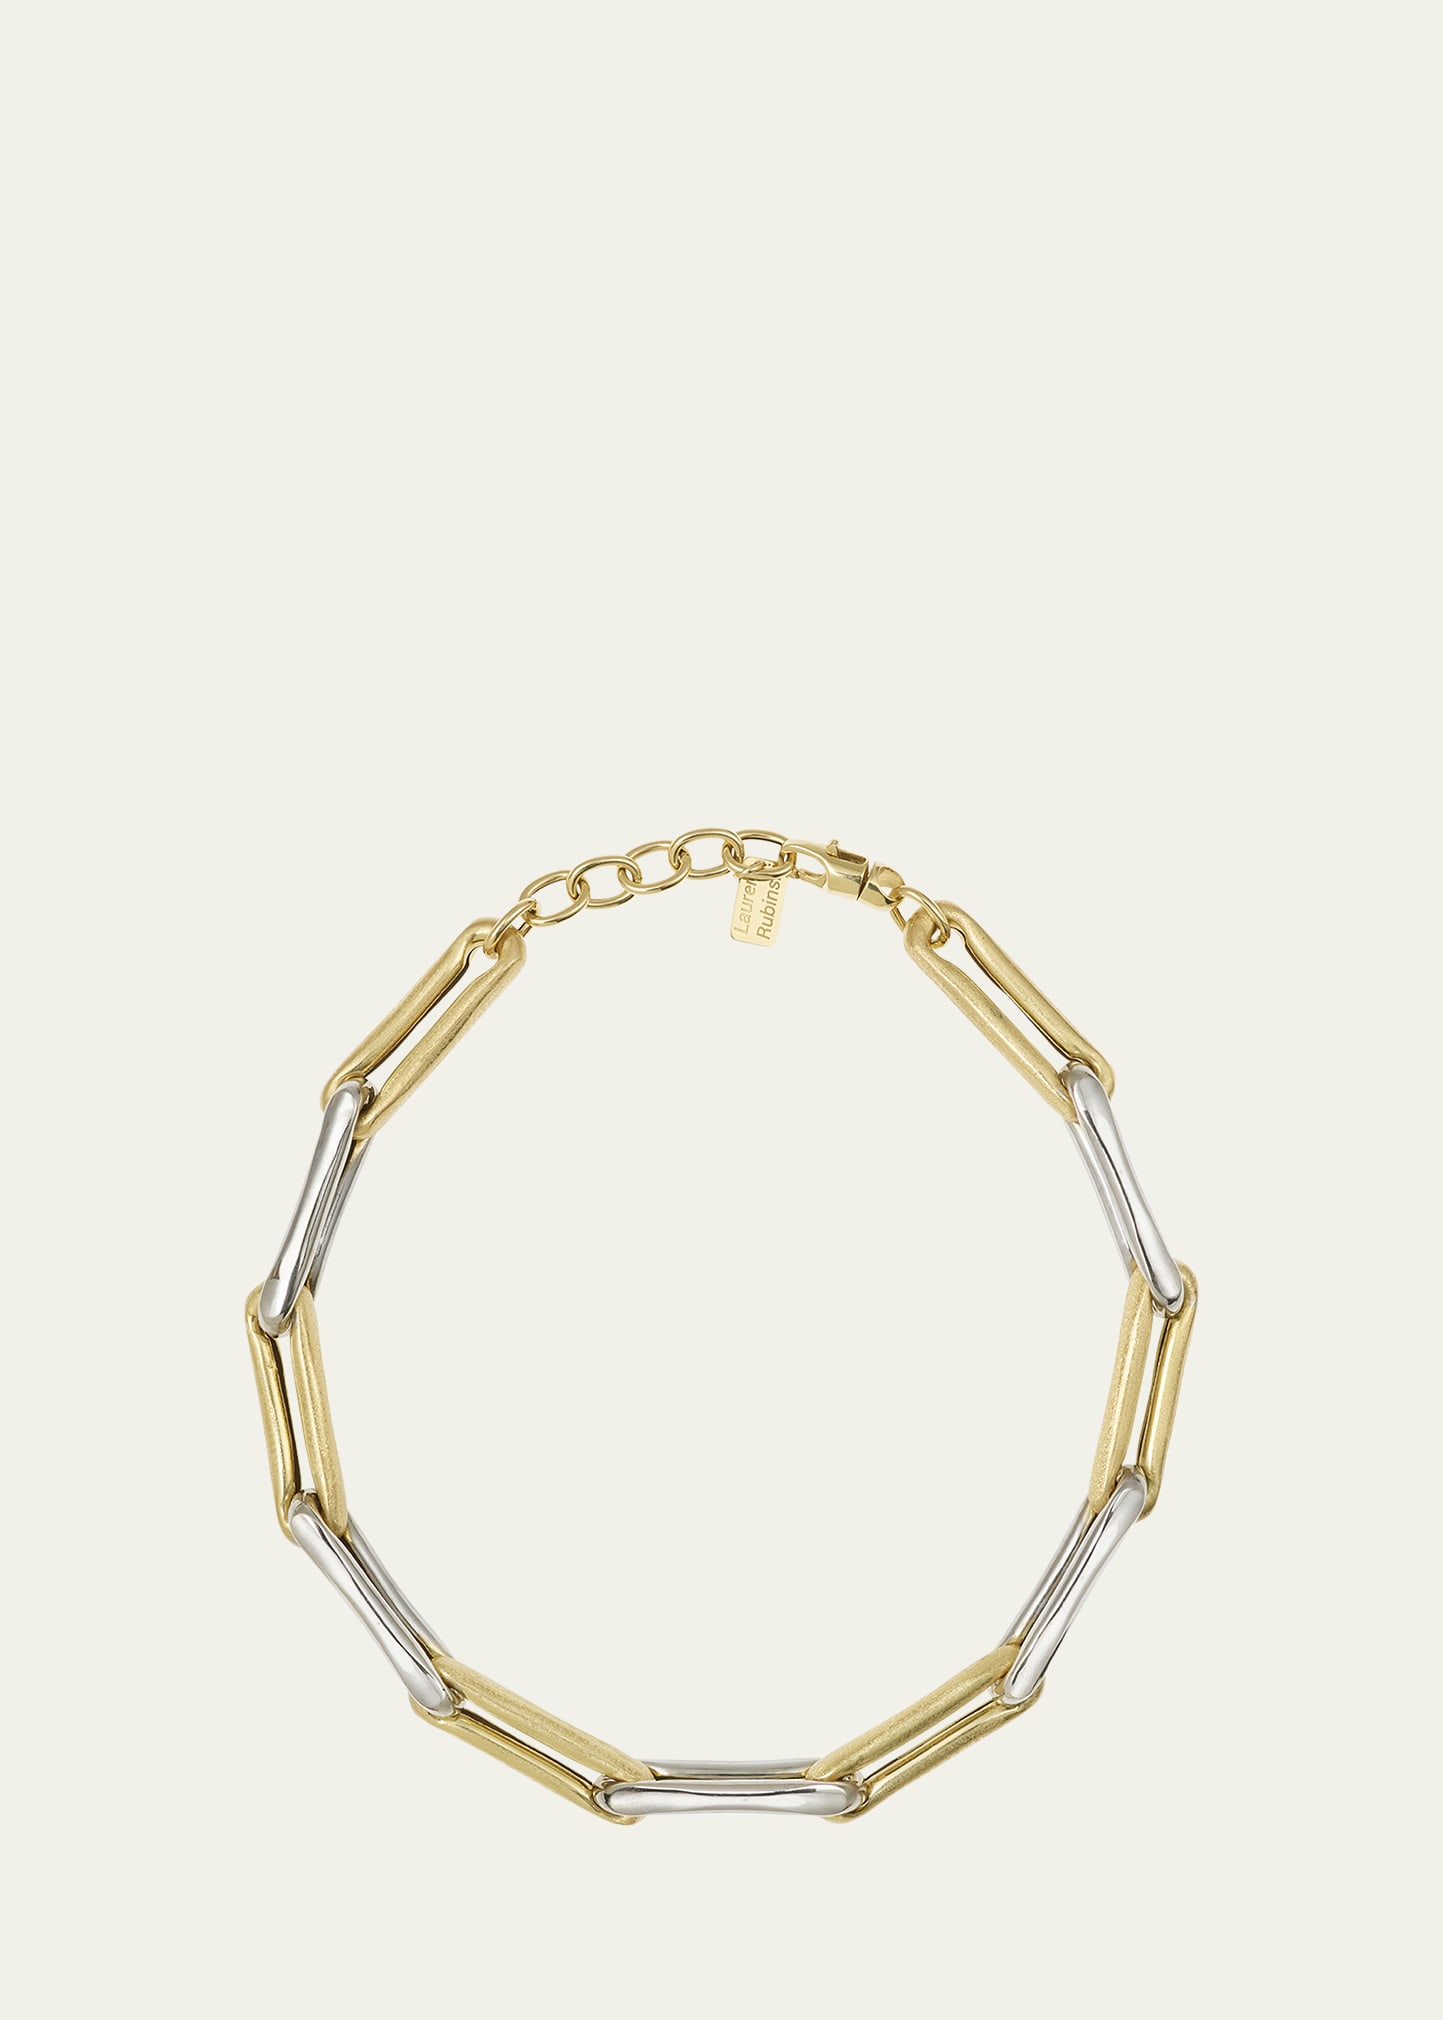 Lauren Rubinski Lr3 XL Link Mixed 14K White and Yellow Gold Necklace with Extender